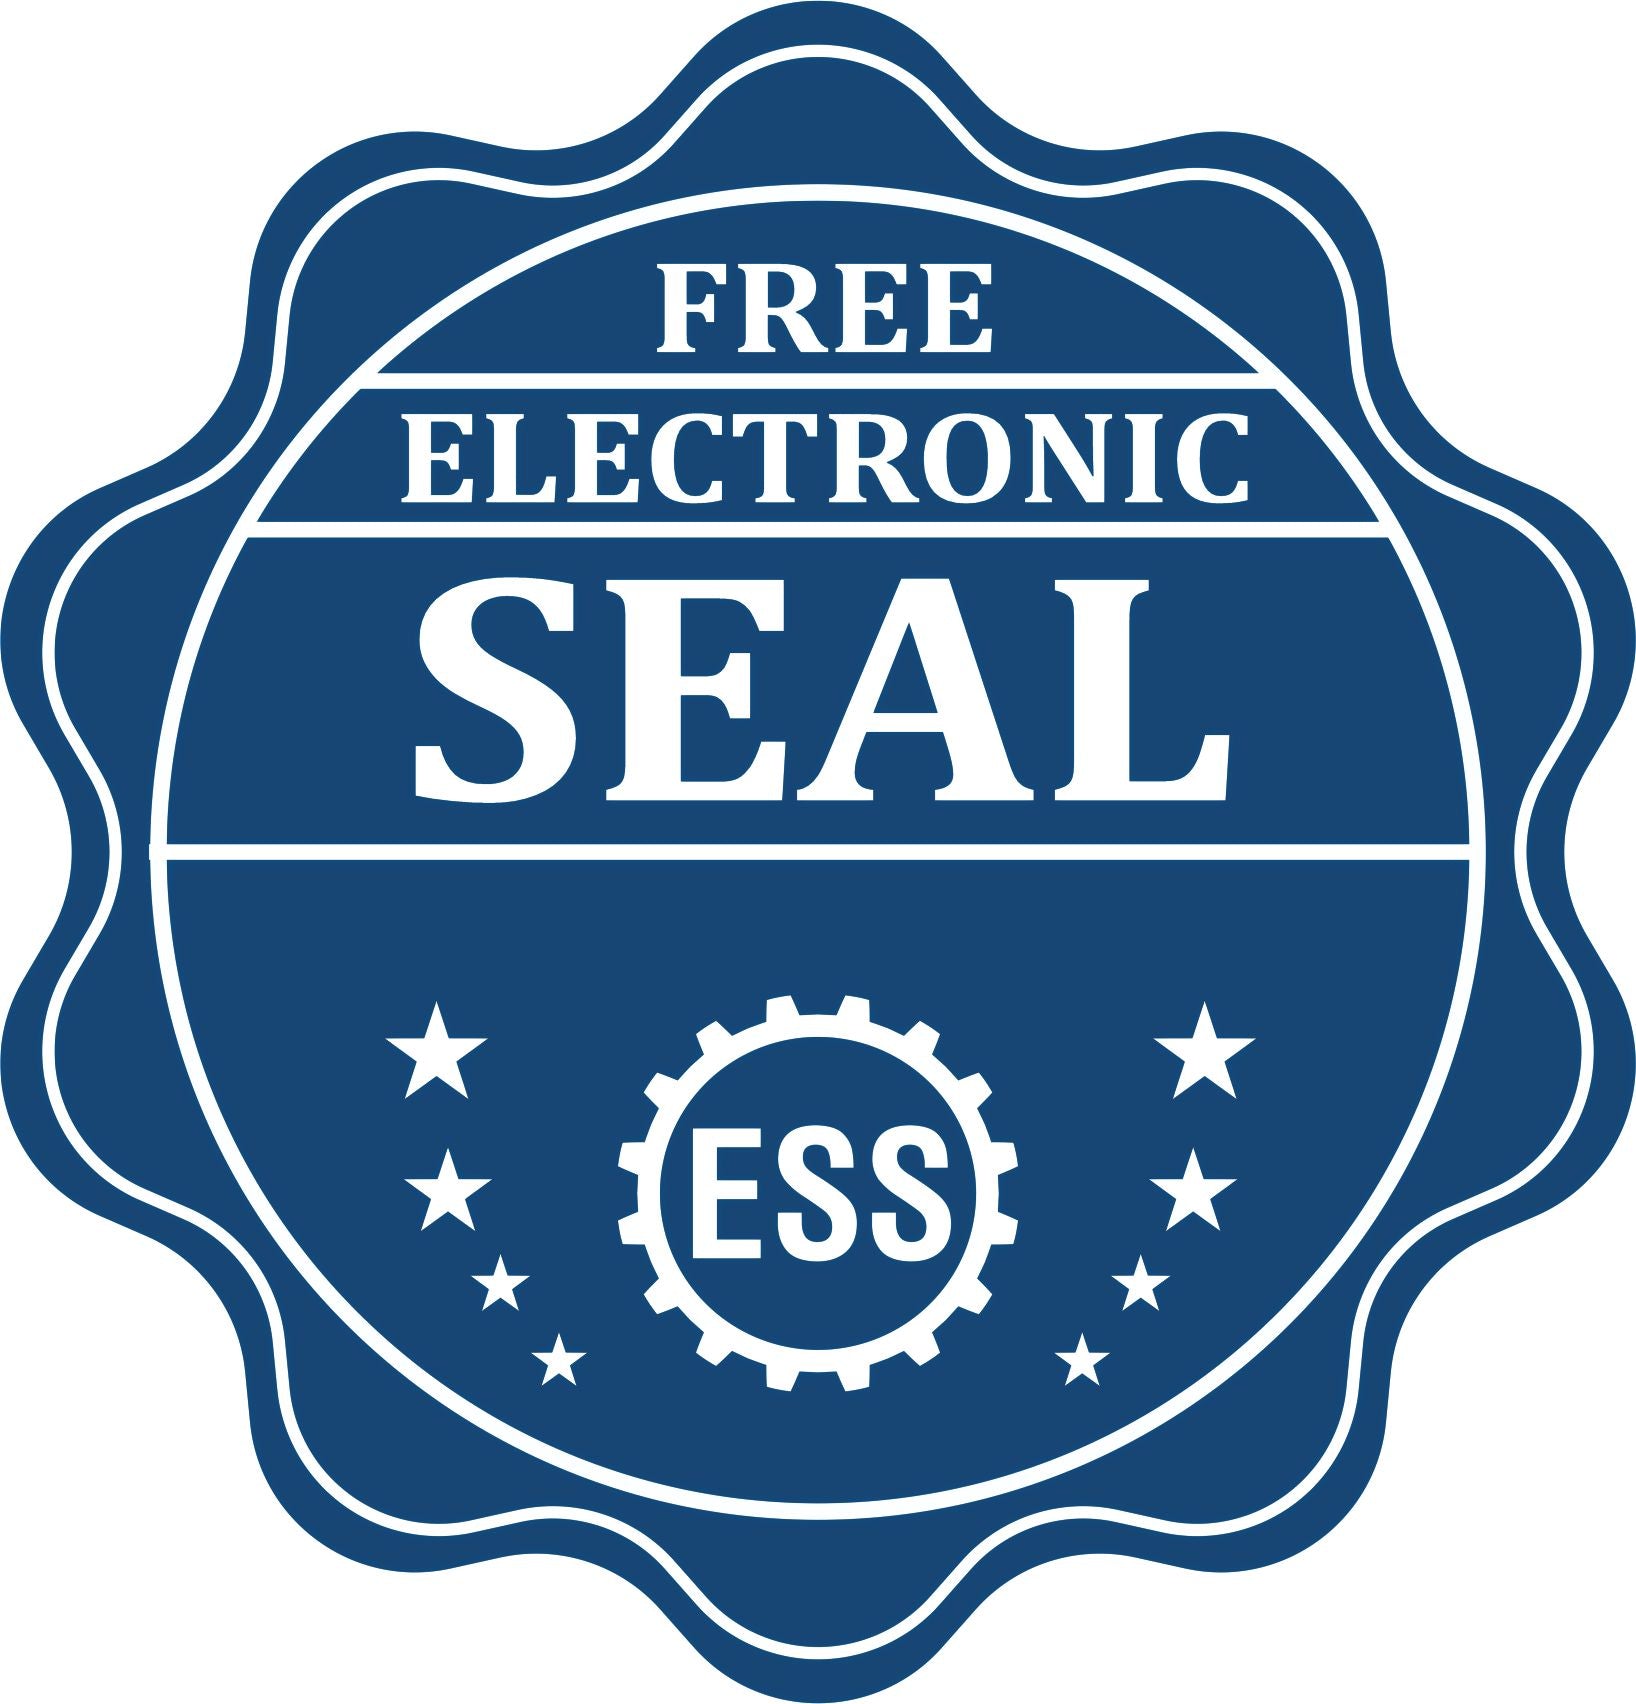 A badge showing a free electronic seal for the Gift Alabama Engineer Seal with stars and the ESS gear on the emblem.